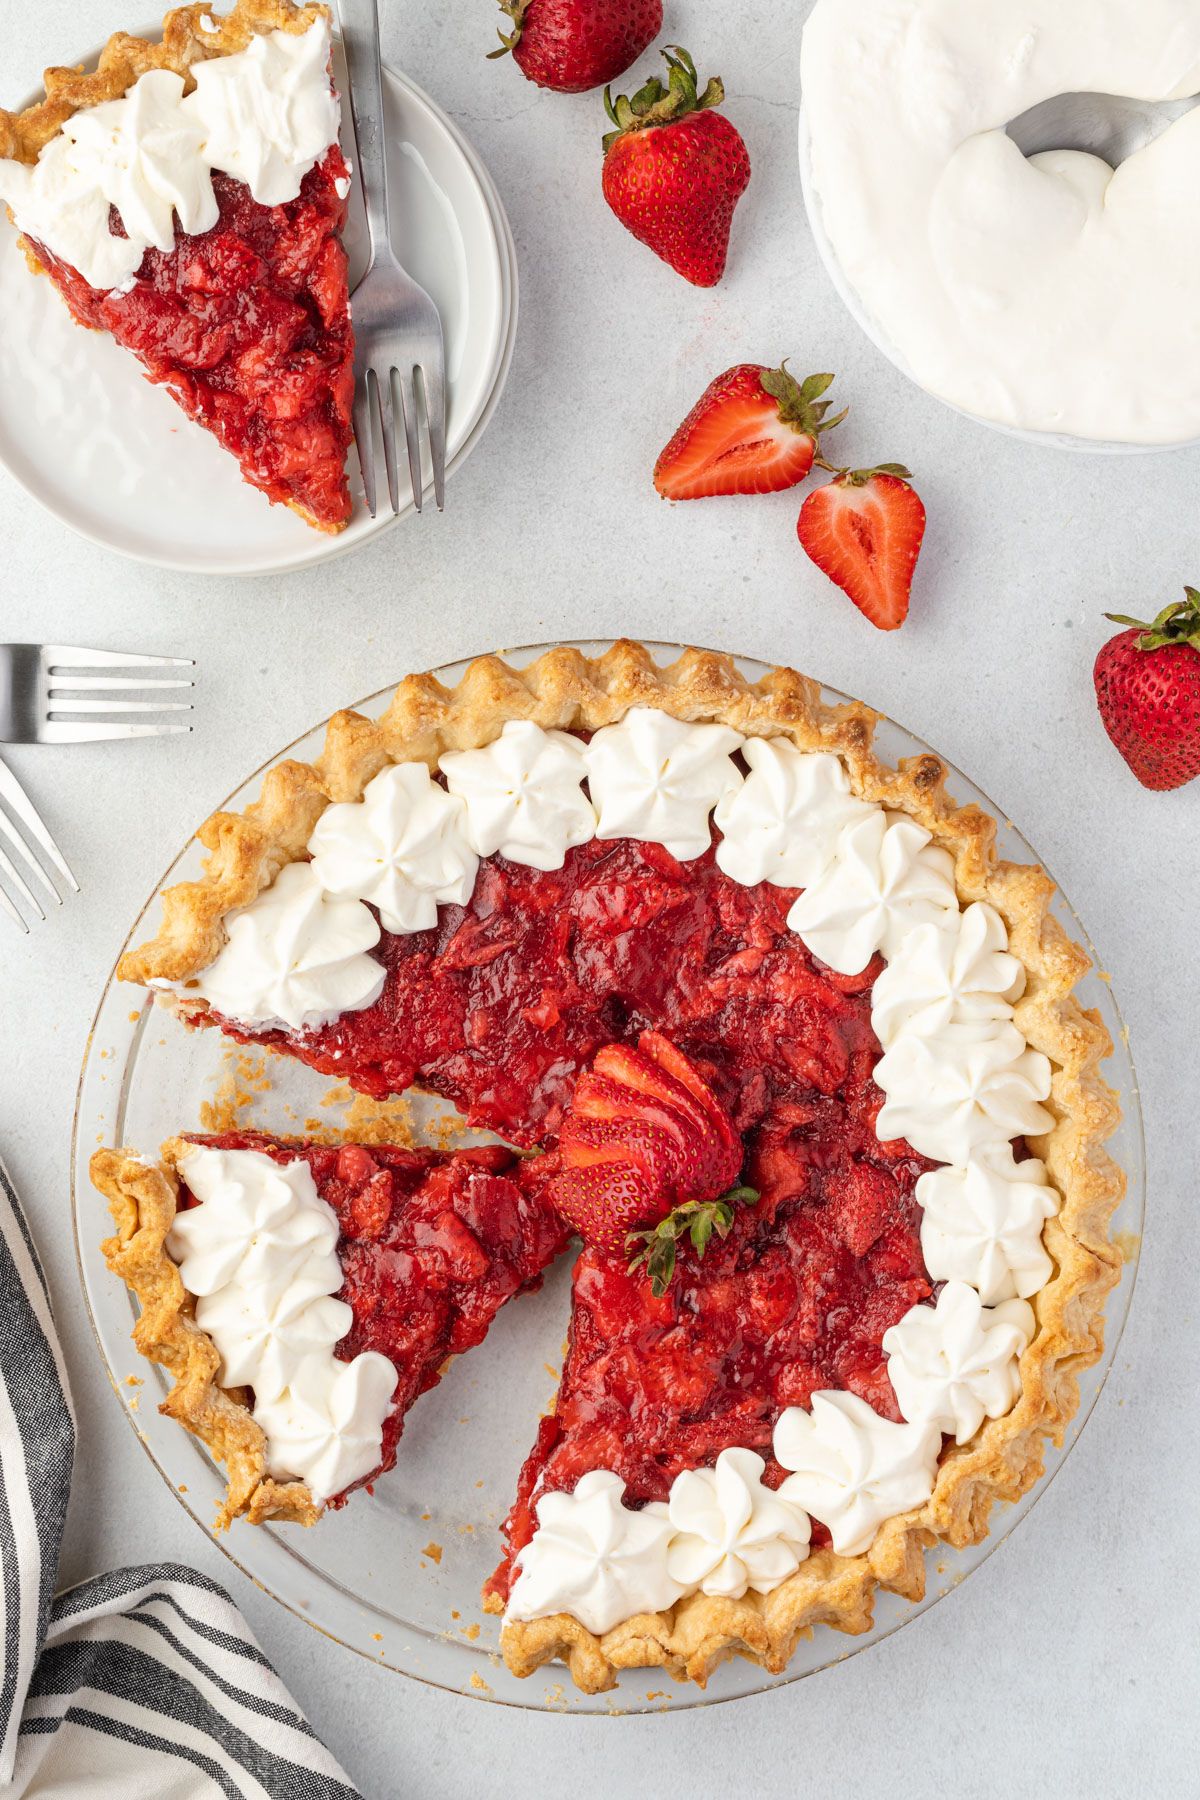 Pie with a slice missing and a slice of pie on a plate with strawberries scattered around.